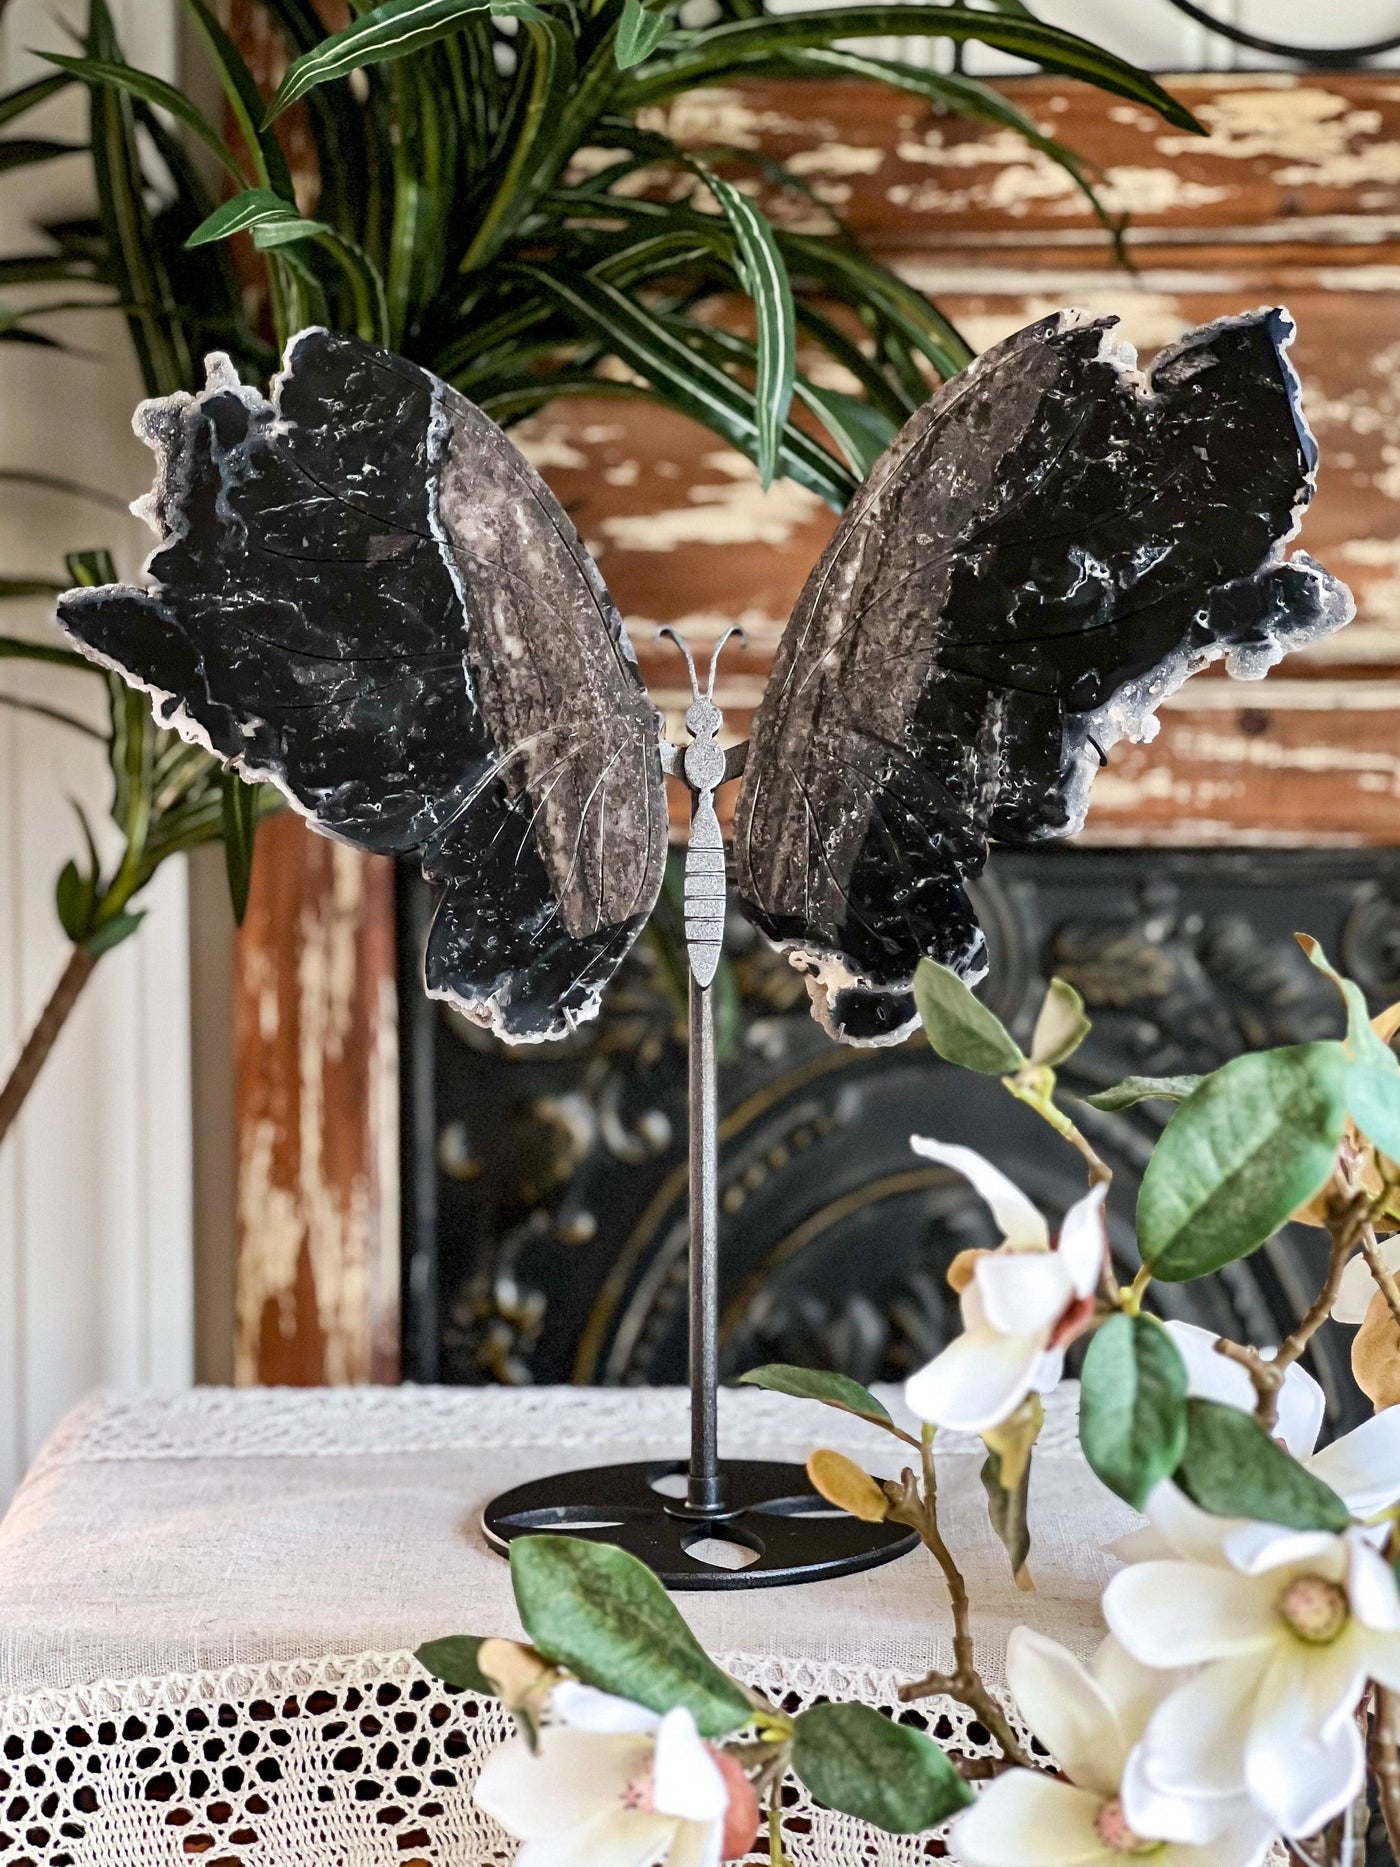 BLACK SPHALERITE BUTTERFLY WINGS WITH DRUZY ON SHIMMERY STAND (XL) Revive In Style Vintage Furniture Painted Refinished Redesign Beautiful One of a Kind Artistic Antique Unique Home Decor Interior Design French Country Shabby Chic Cottage Farmhouse Grandmillenial Coastal Chalk Paint Metallic Glam Eclectic Quality Dovetailed Rustic Furniture Painter Pinterest Bedroom Living Room Entryway Kitchen Home Trends House Styles Decorating ideas